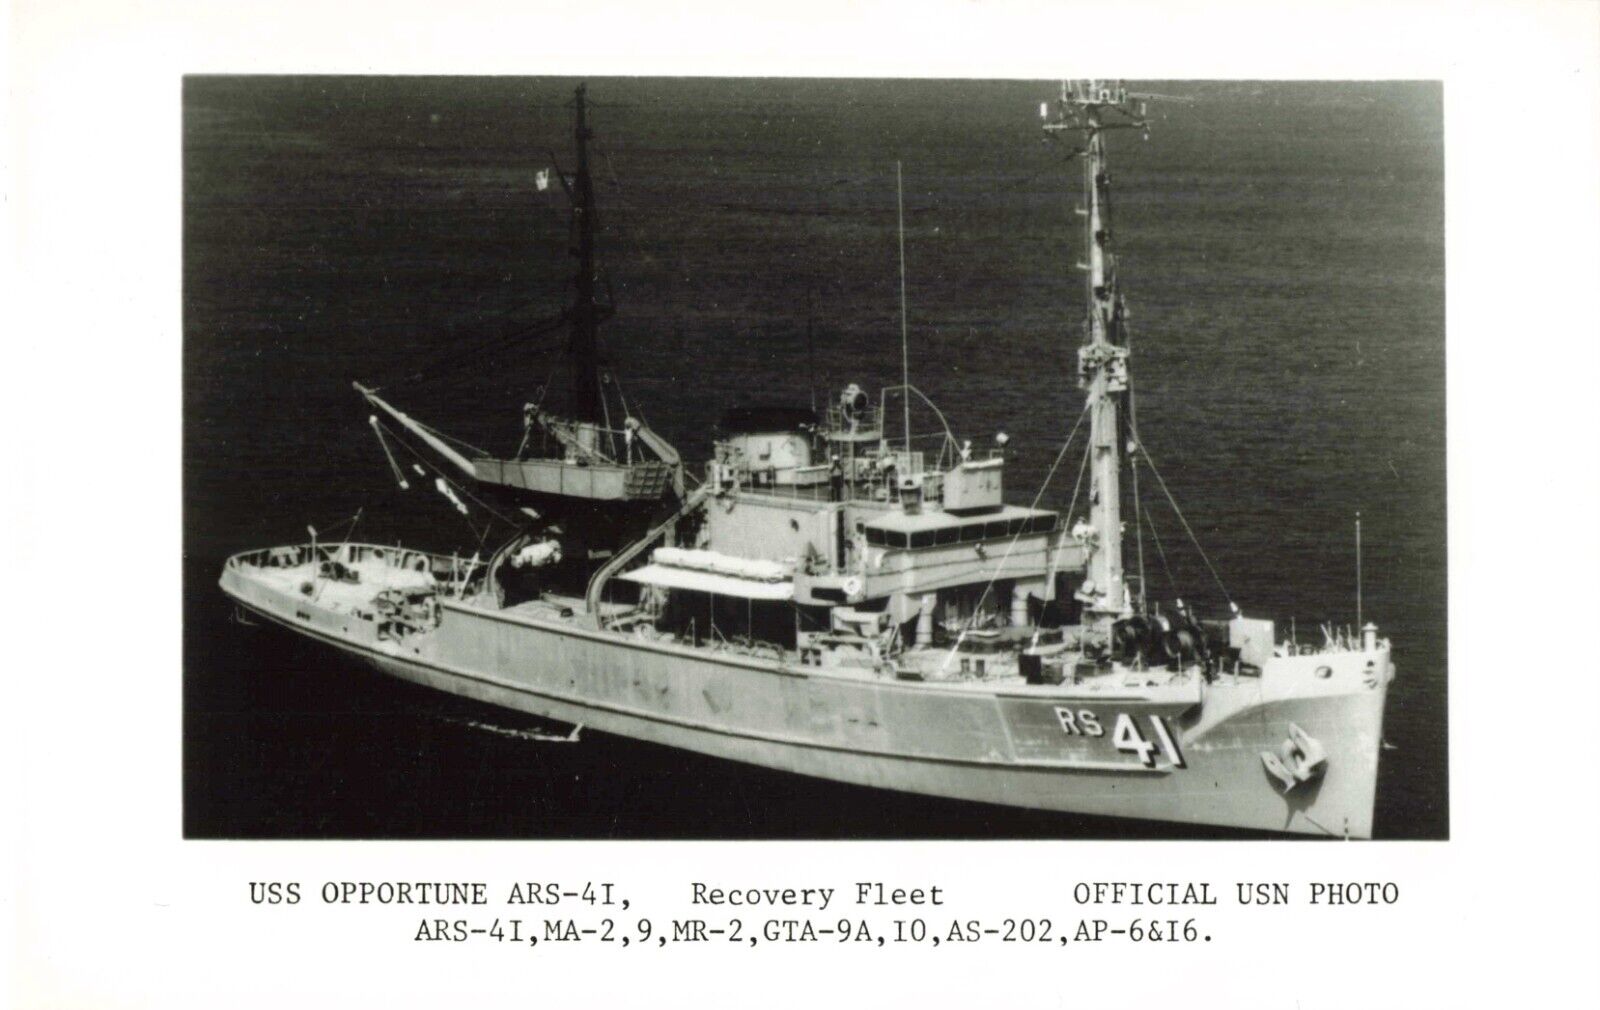 Photo USS Opportune ARS-41 MA-2,9 MR-2 GTA-9A,10 Recovery Fleet Official US Navy